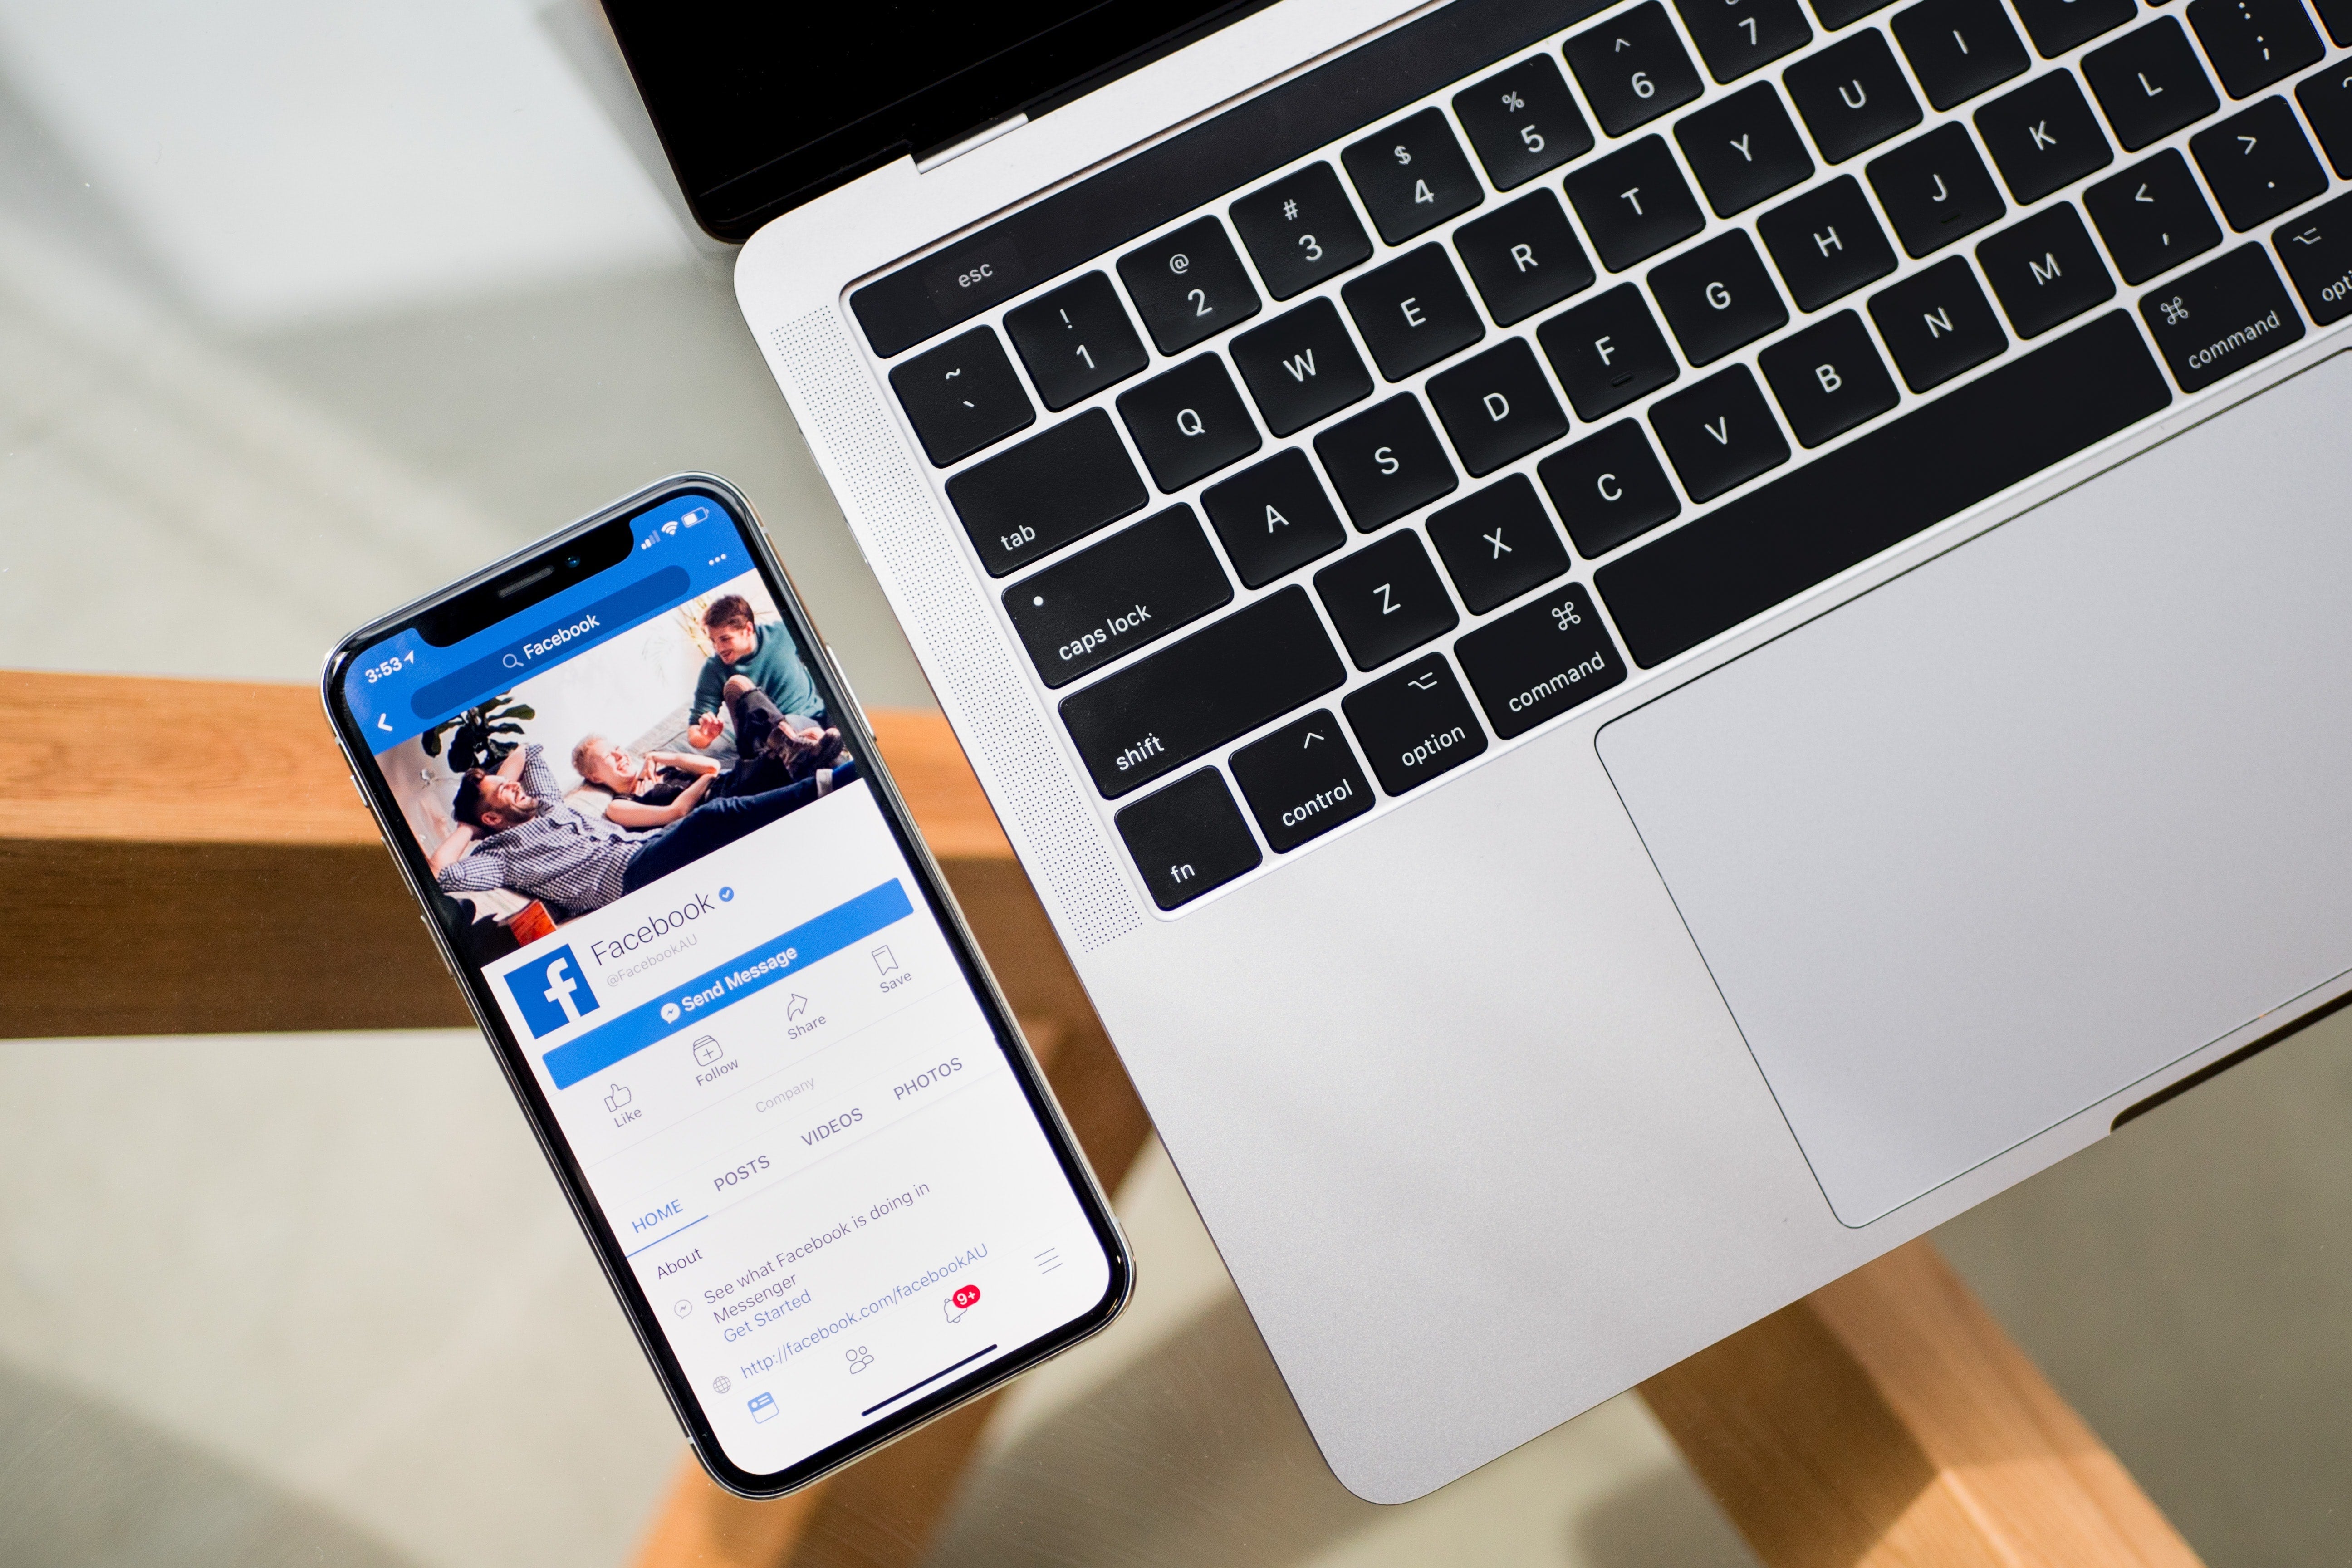 Facebook is on an iPhone X screen, which sits near a MacBook keyboard.